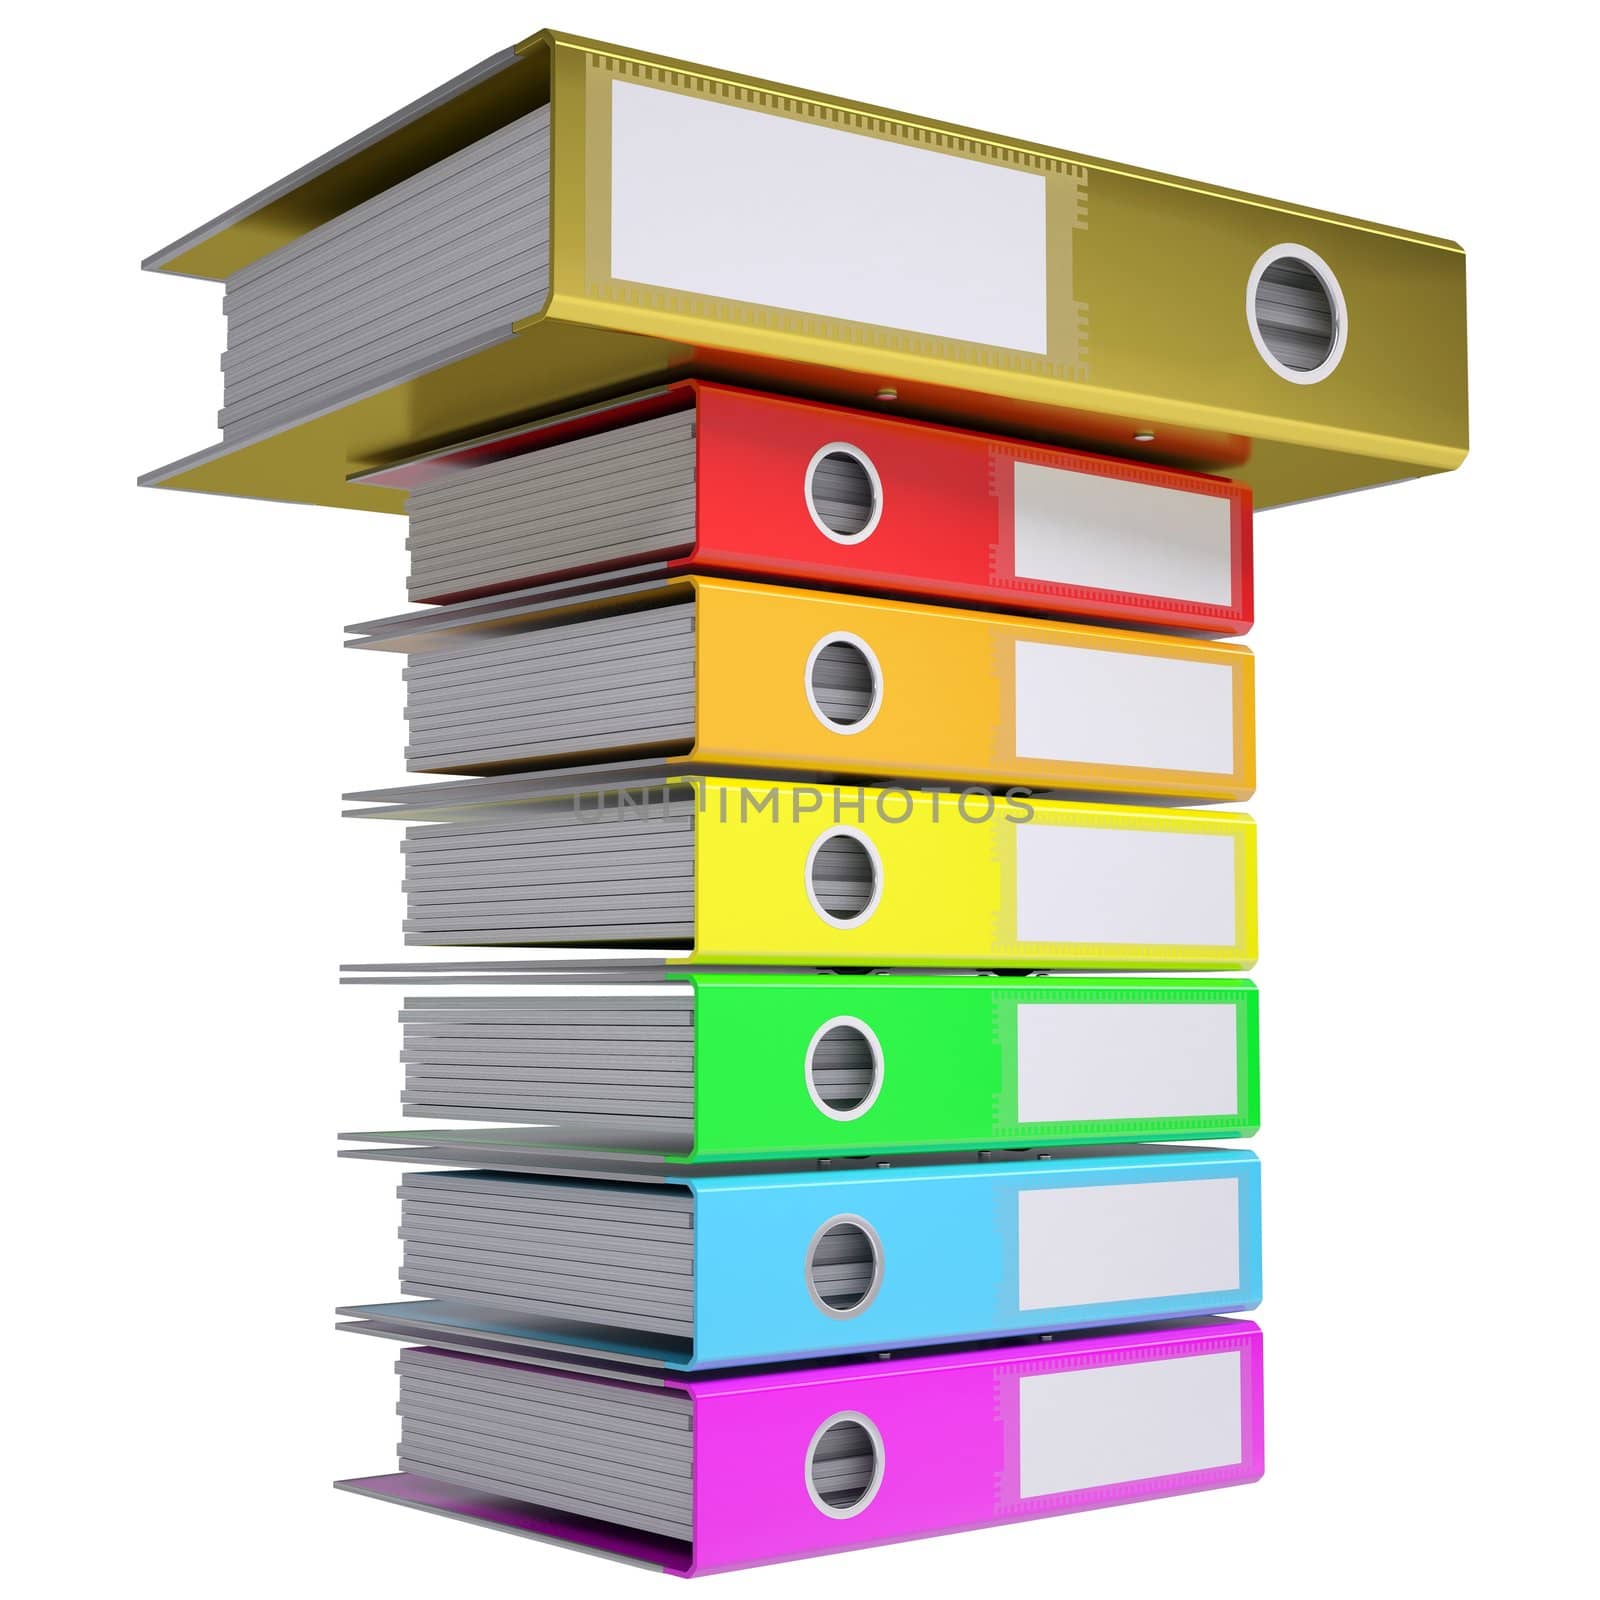 A stack of office folders, folder golden on top by cherezoff